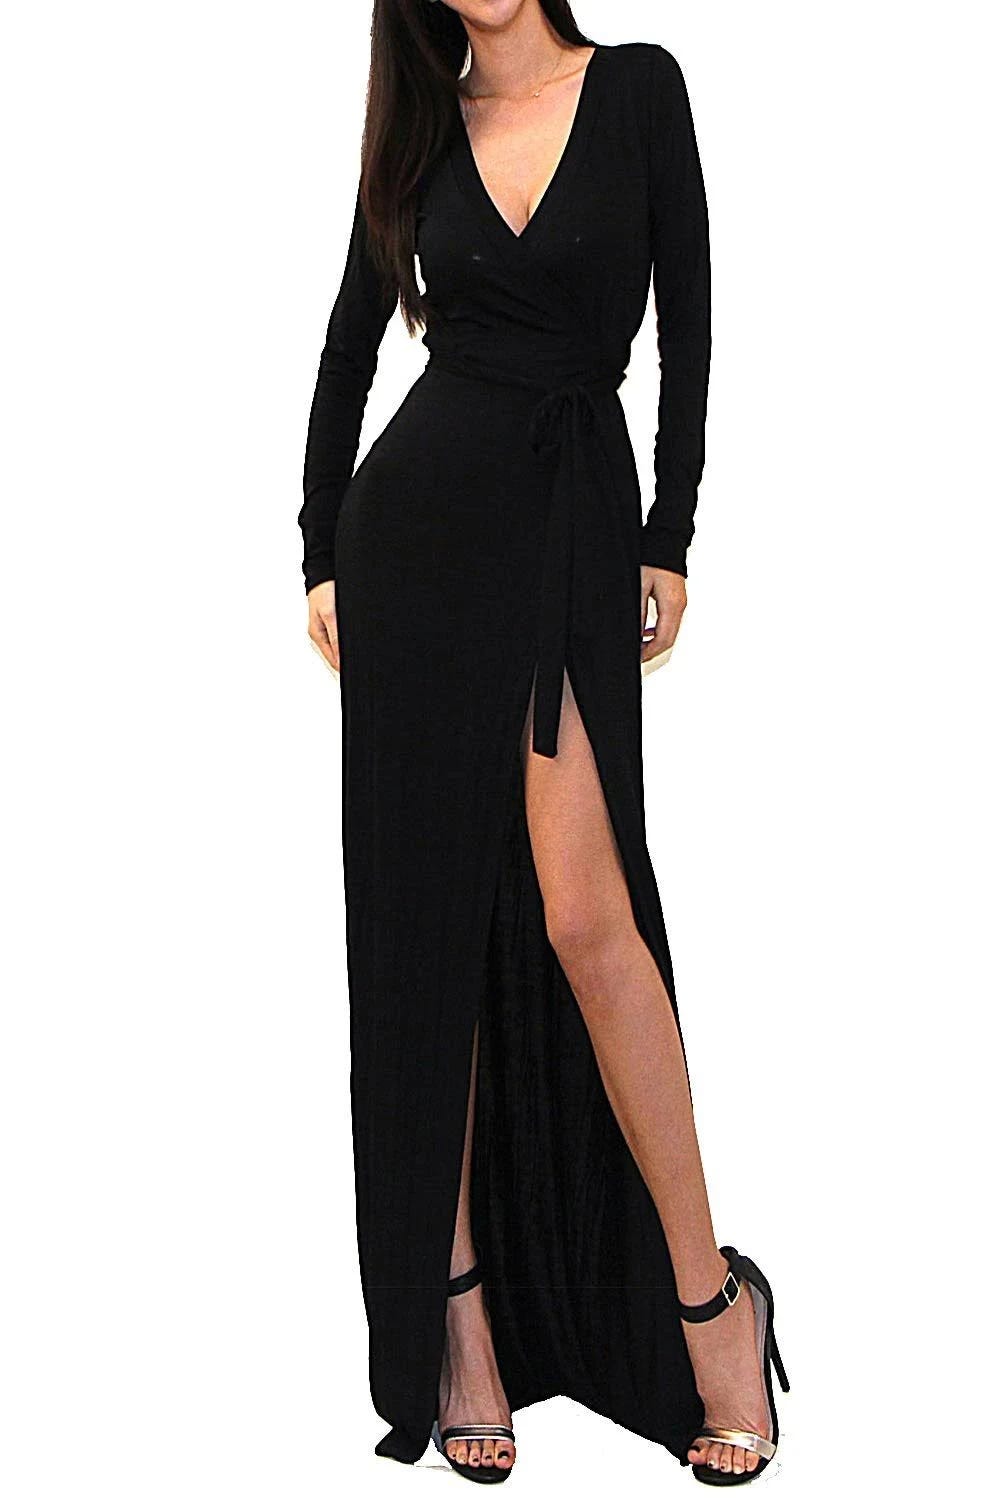 Cleavage-Wrapped Long Sleeve Maxi Dress for Elegant Nights Out | Image